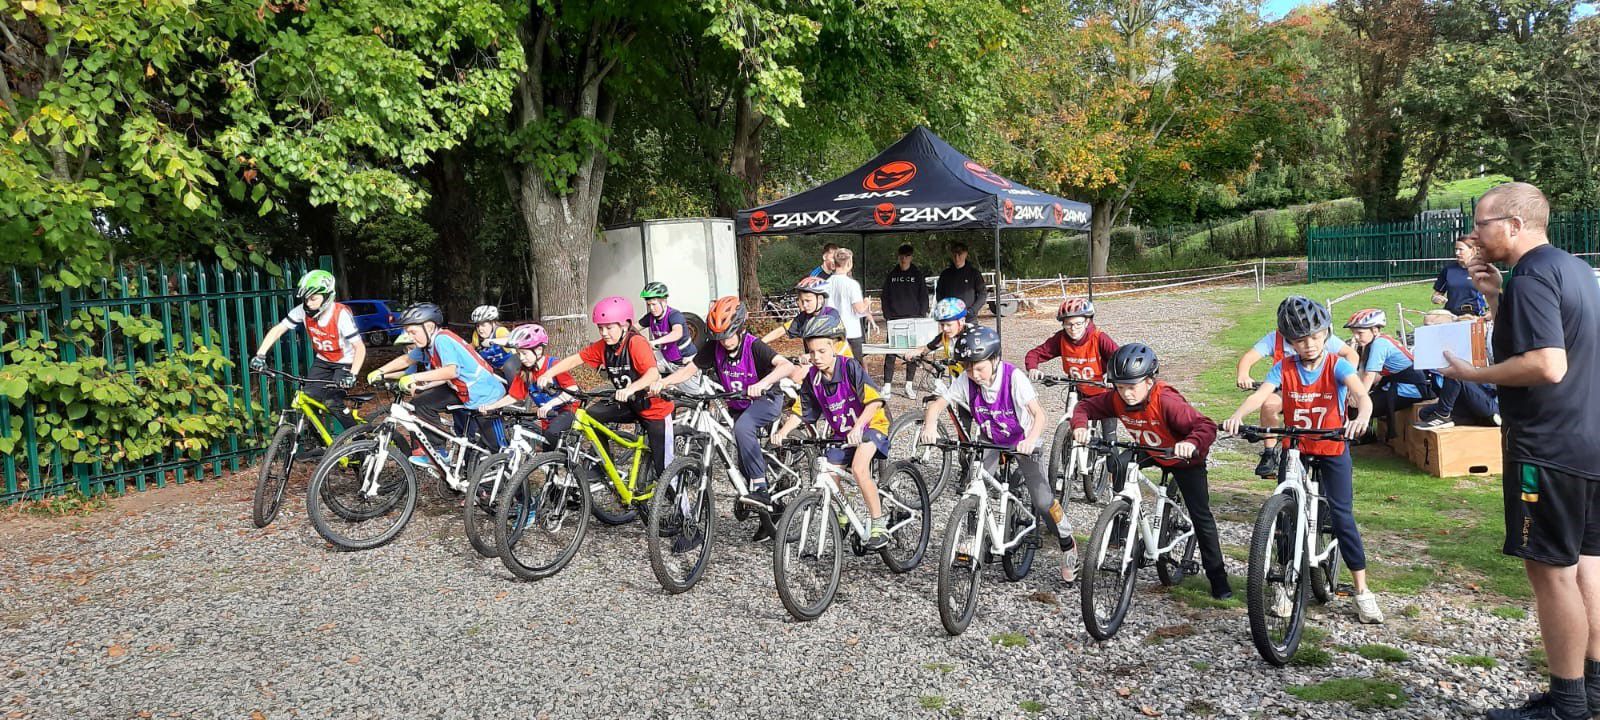 Primary school children on bikes lined up at a start line